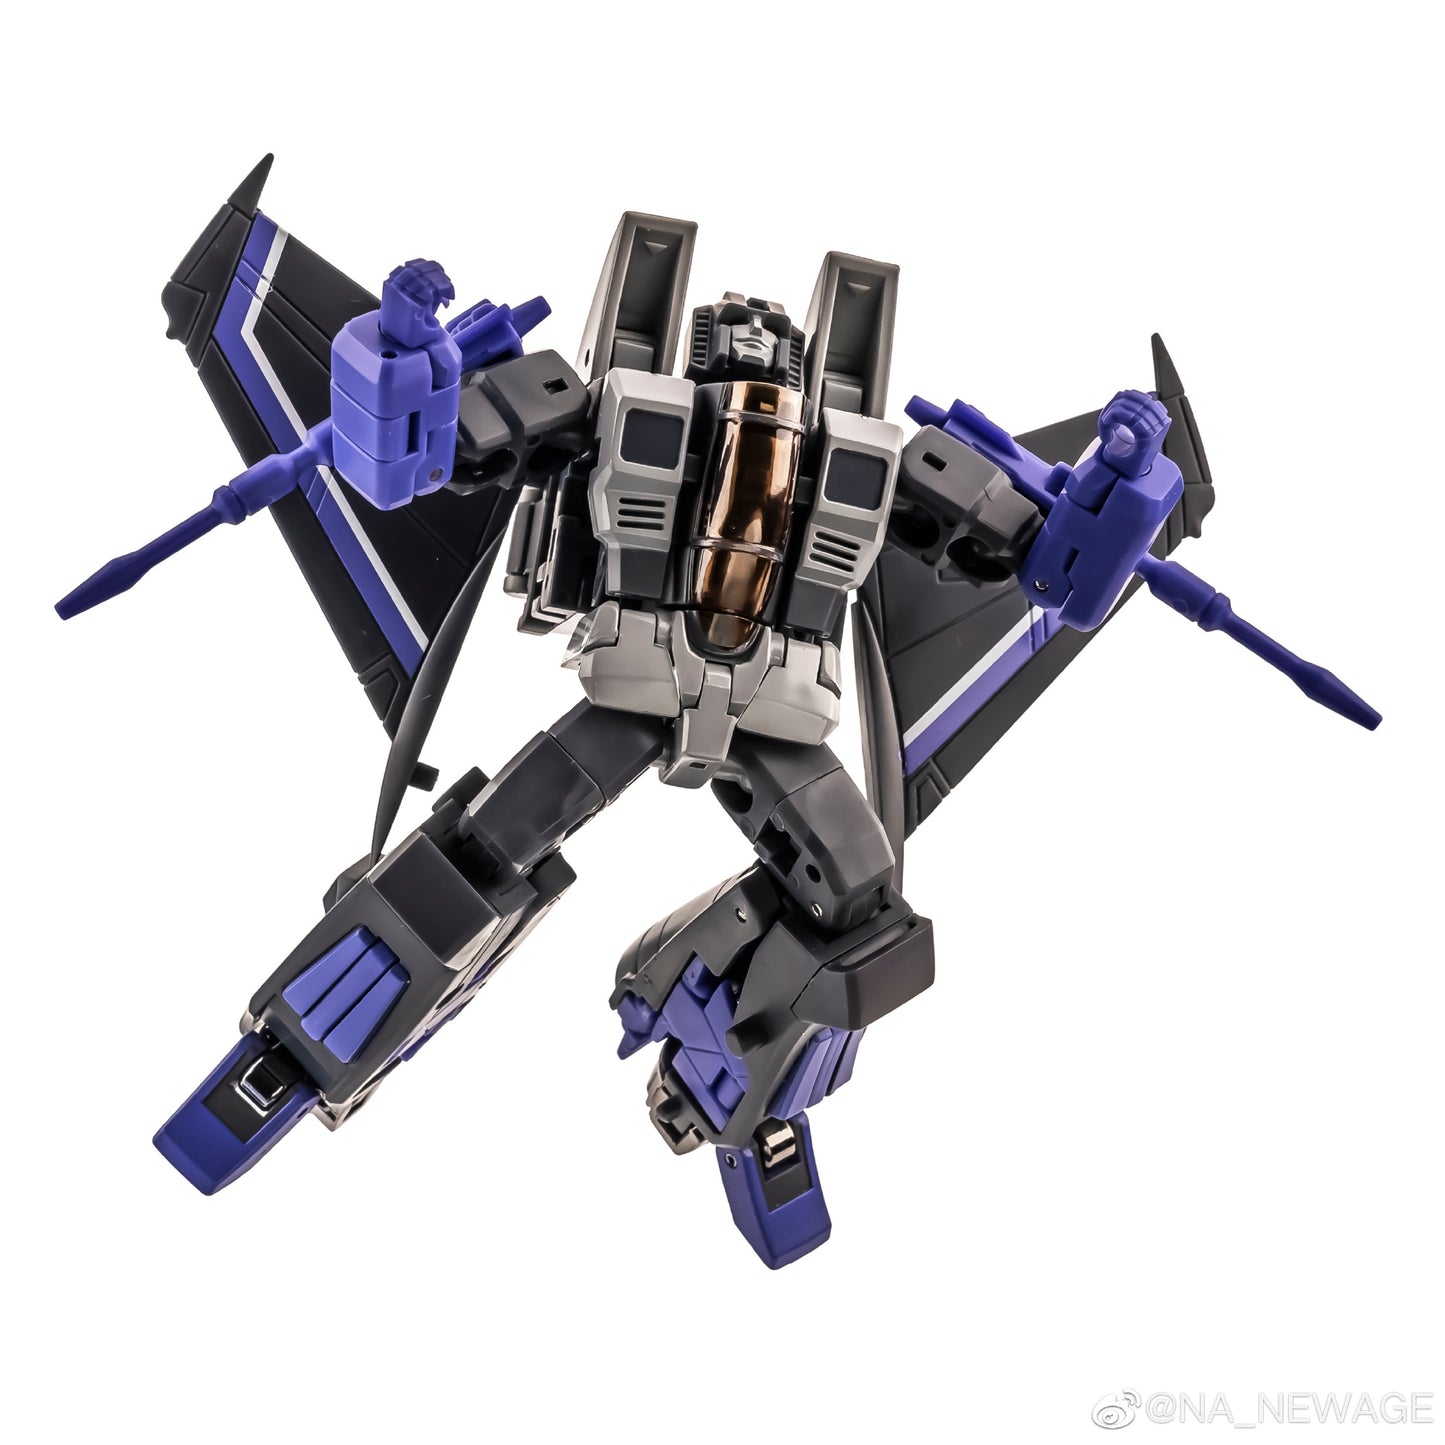 NA H15C Samael is a mini fighter jet from Newage and is able to convert into a battling robot figure. Samael includes a flight display stand and several accessories.